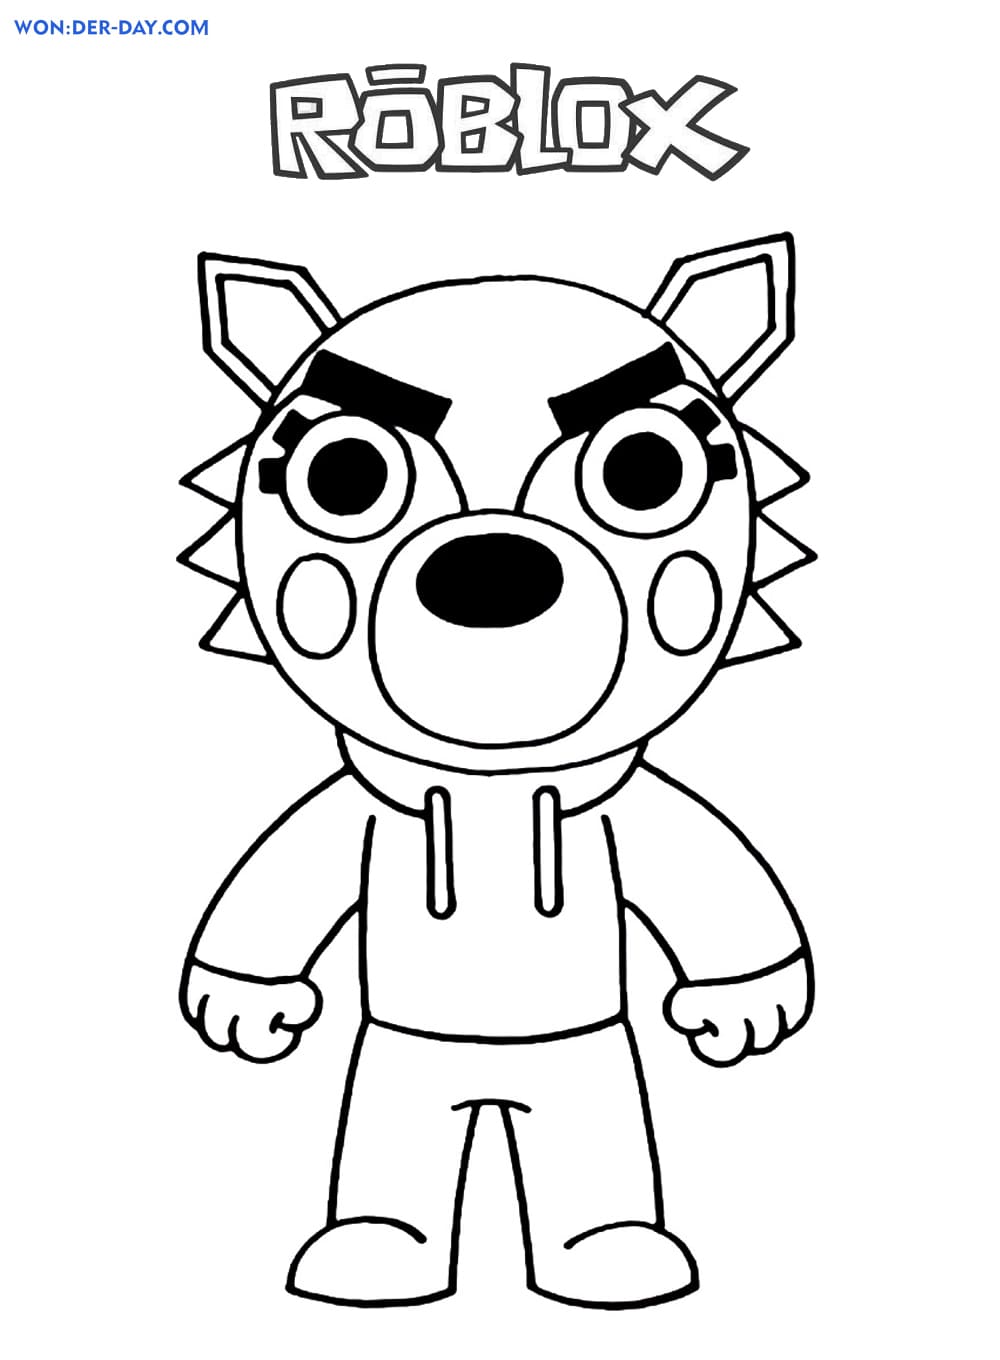 Piggy Roblox Coloring Pages Wonder Day Coloring Pages For Children And Adults - roblox piggy coloring pages to print